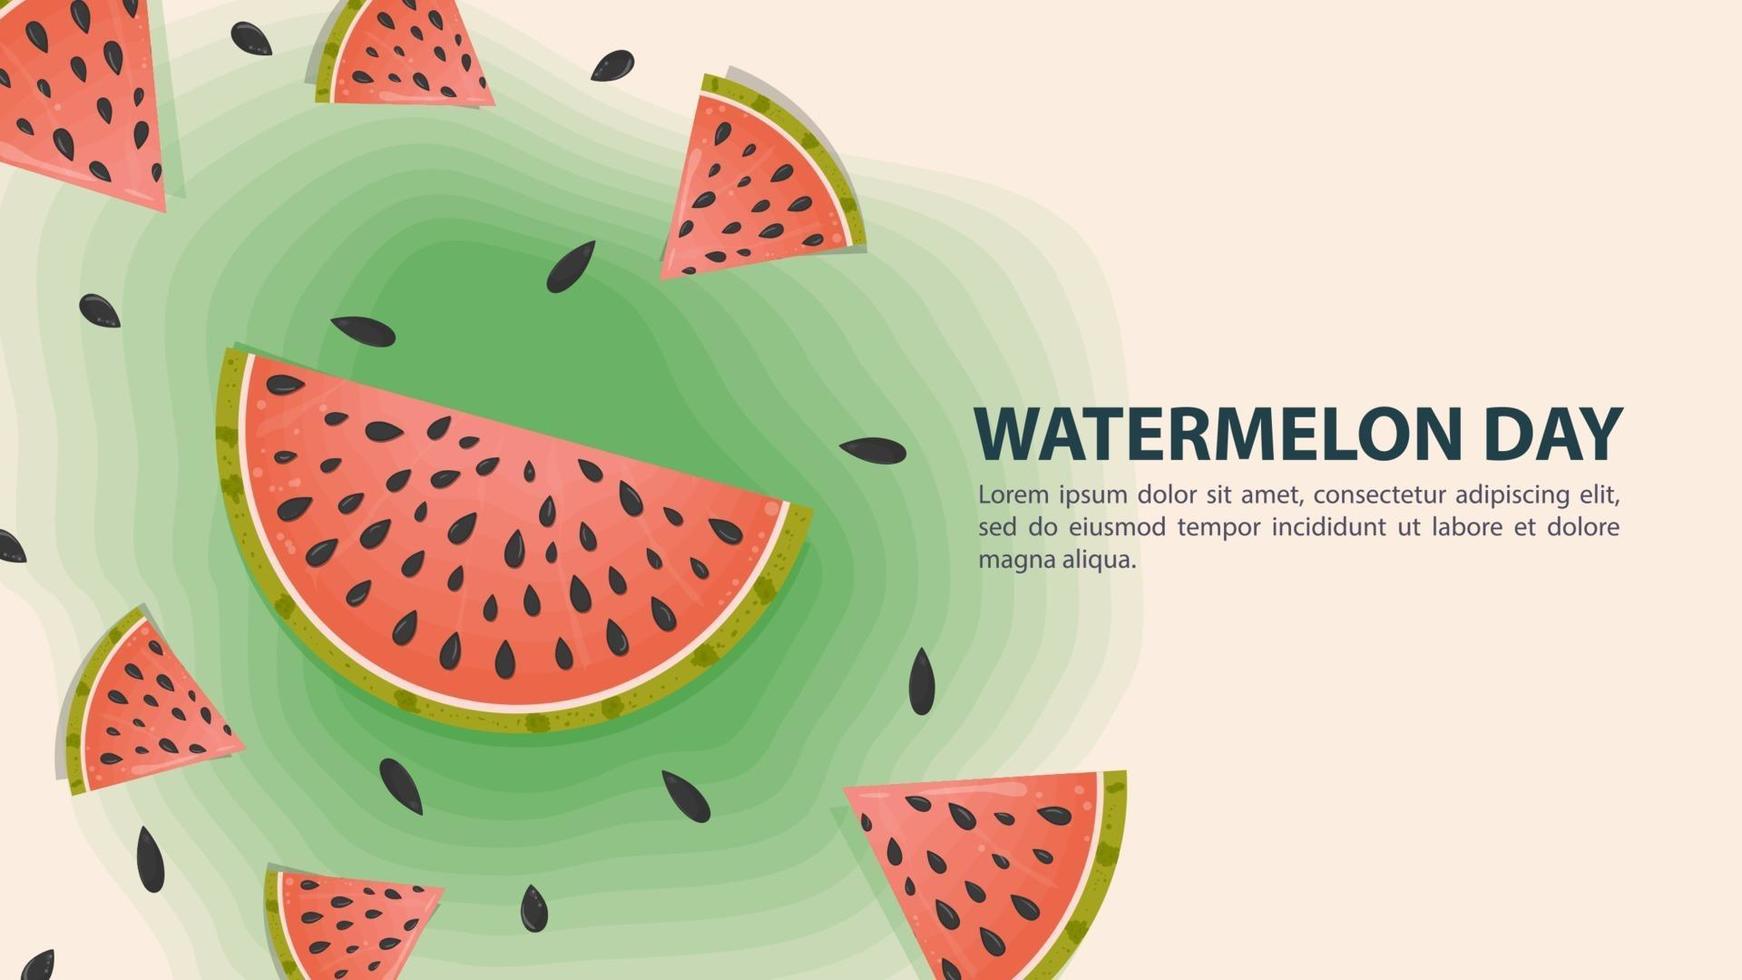 Watermelon day design with slices of watermelon vector